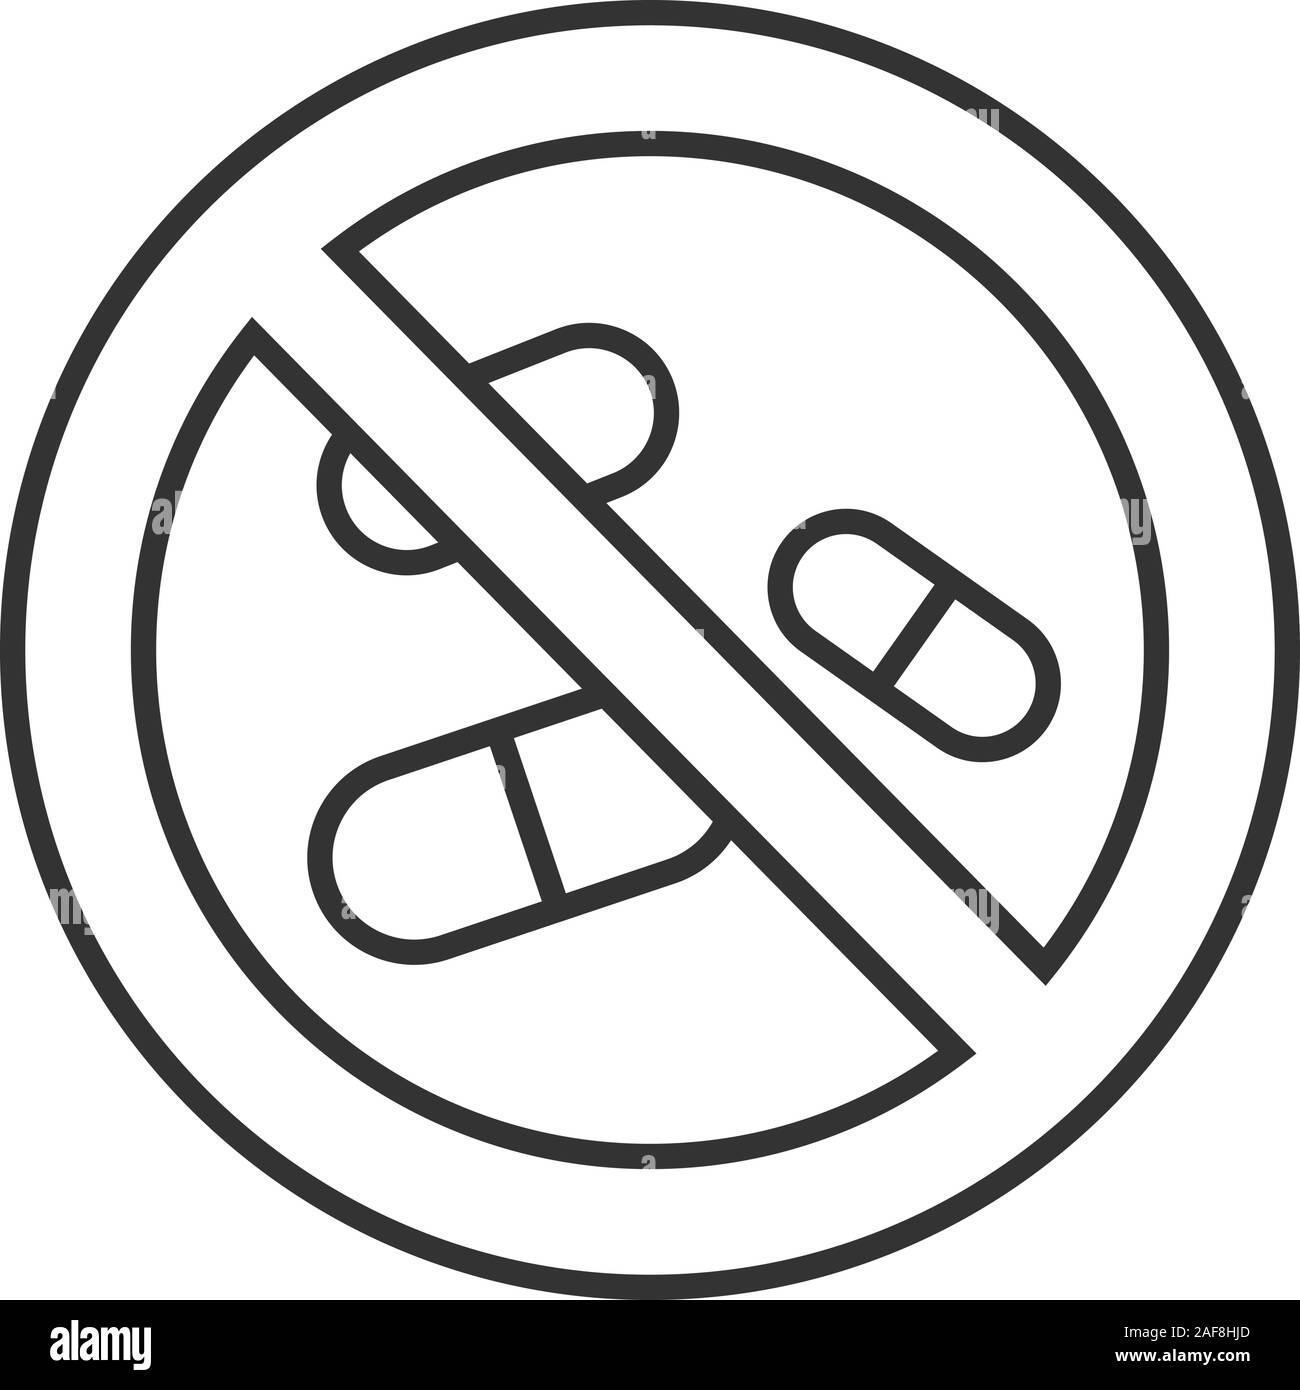 Forbidden sign with pills linear icon. Thin line illustration. No drugs prohibition. Stop contour symbol. Vector isolated outline drawing Stock Vector